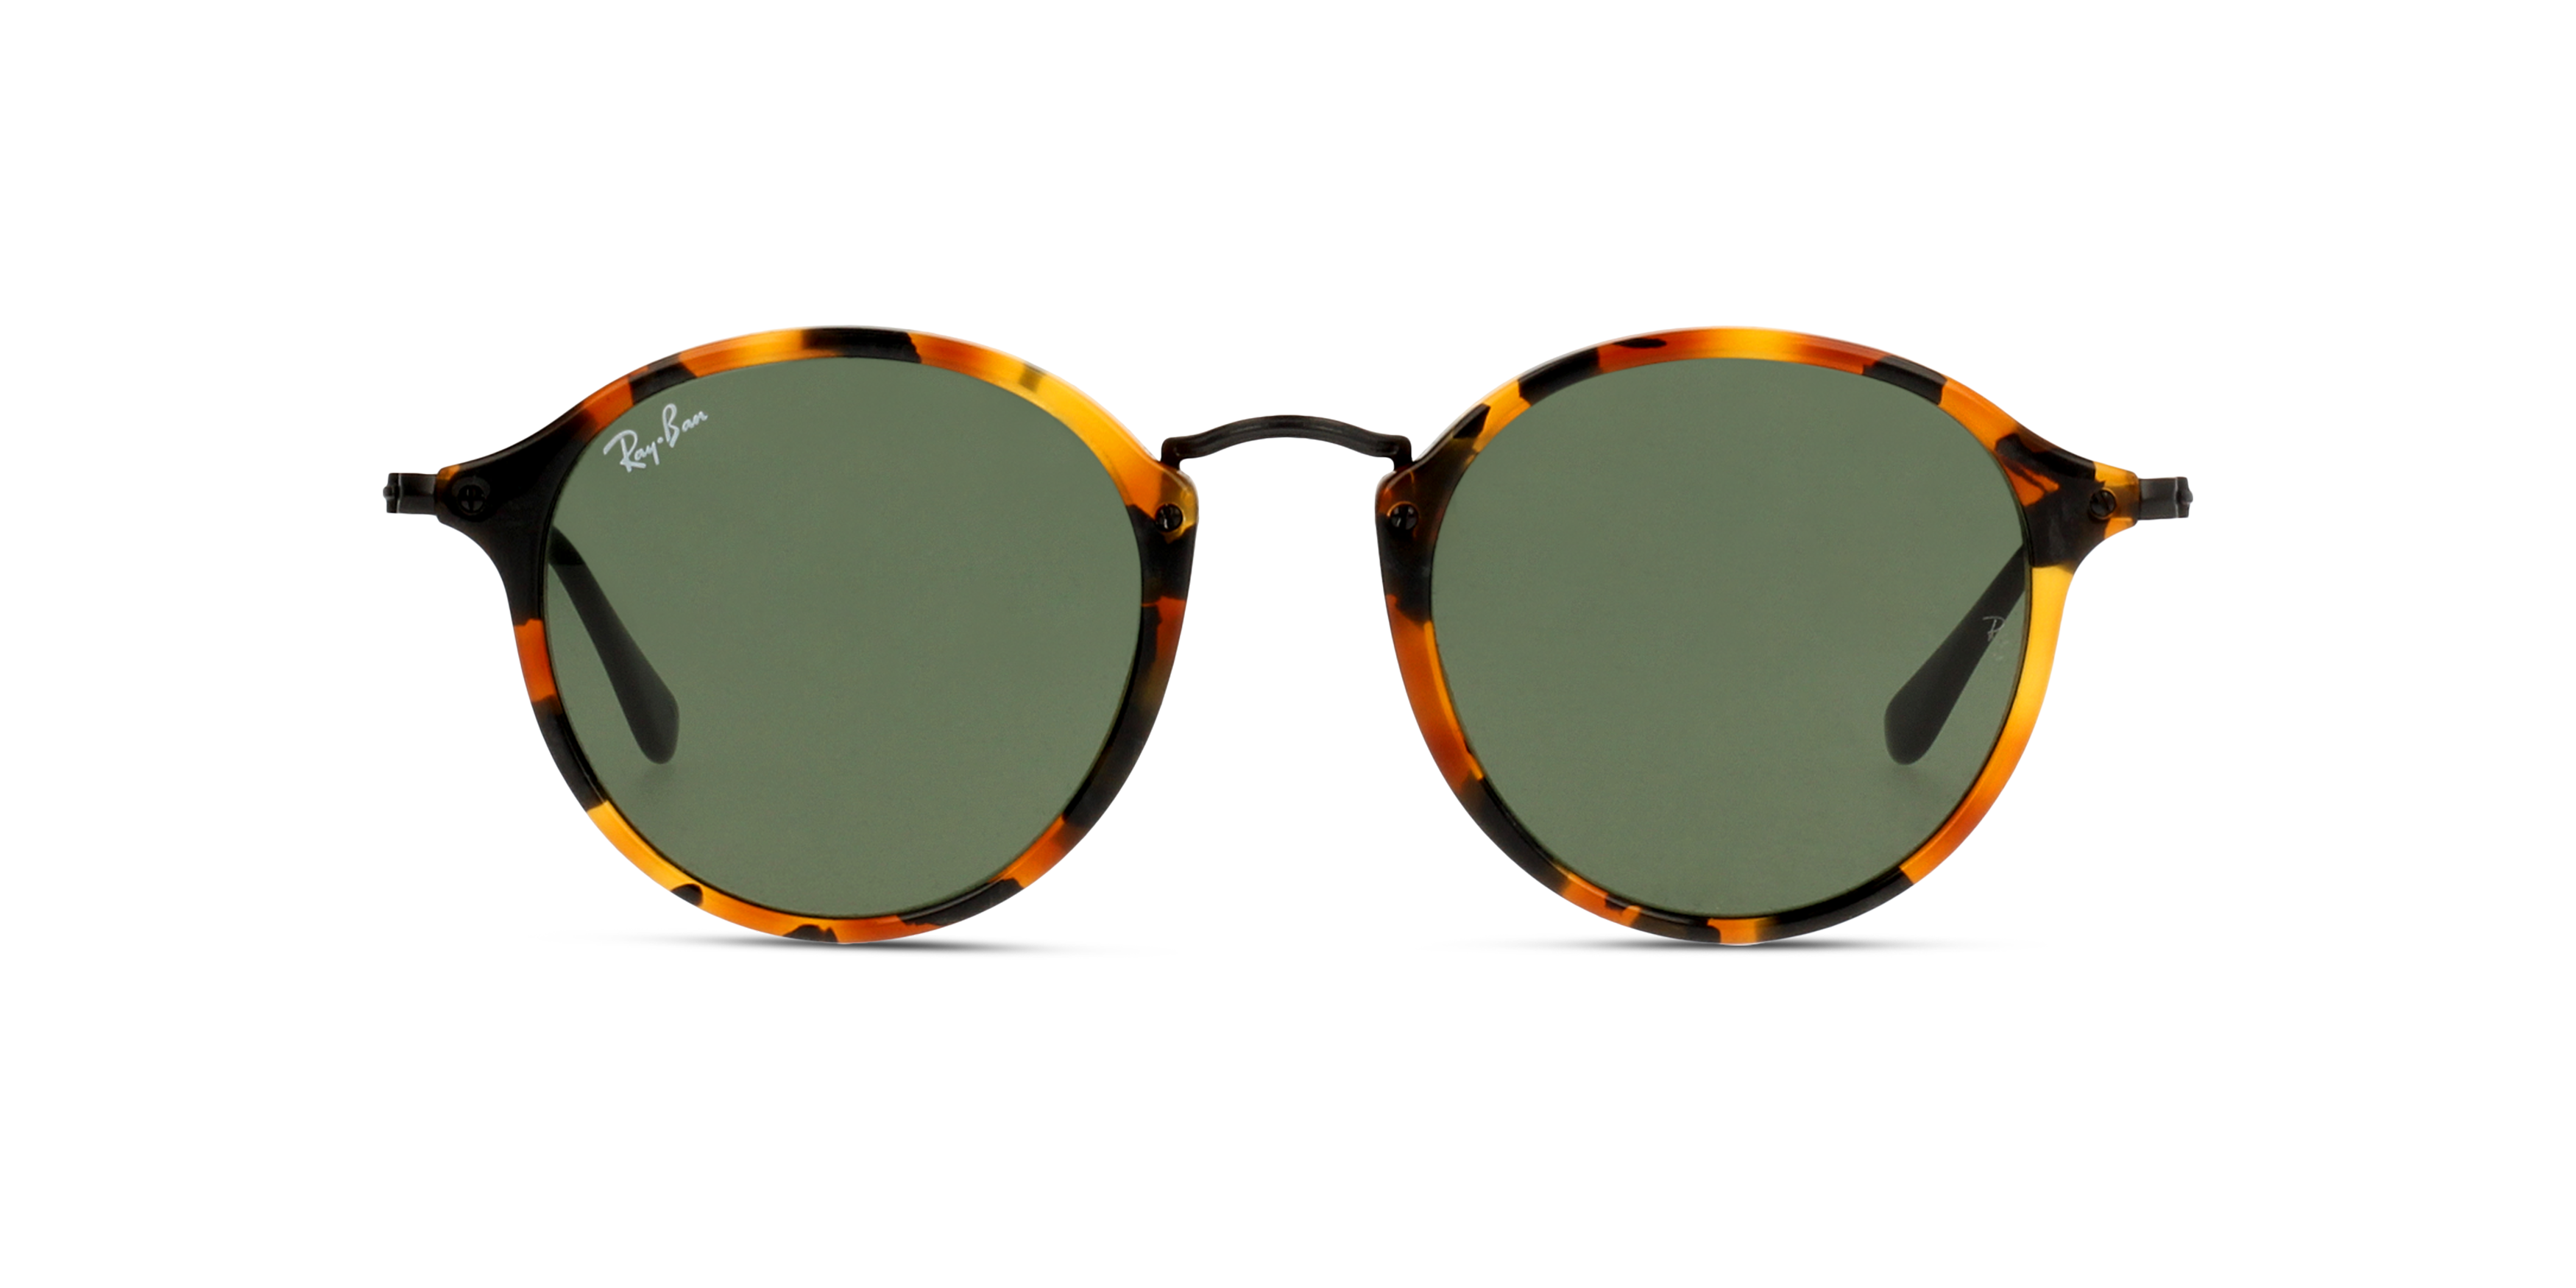 [products.image.front] RAY-BAN RB2447 1157